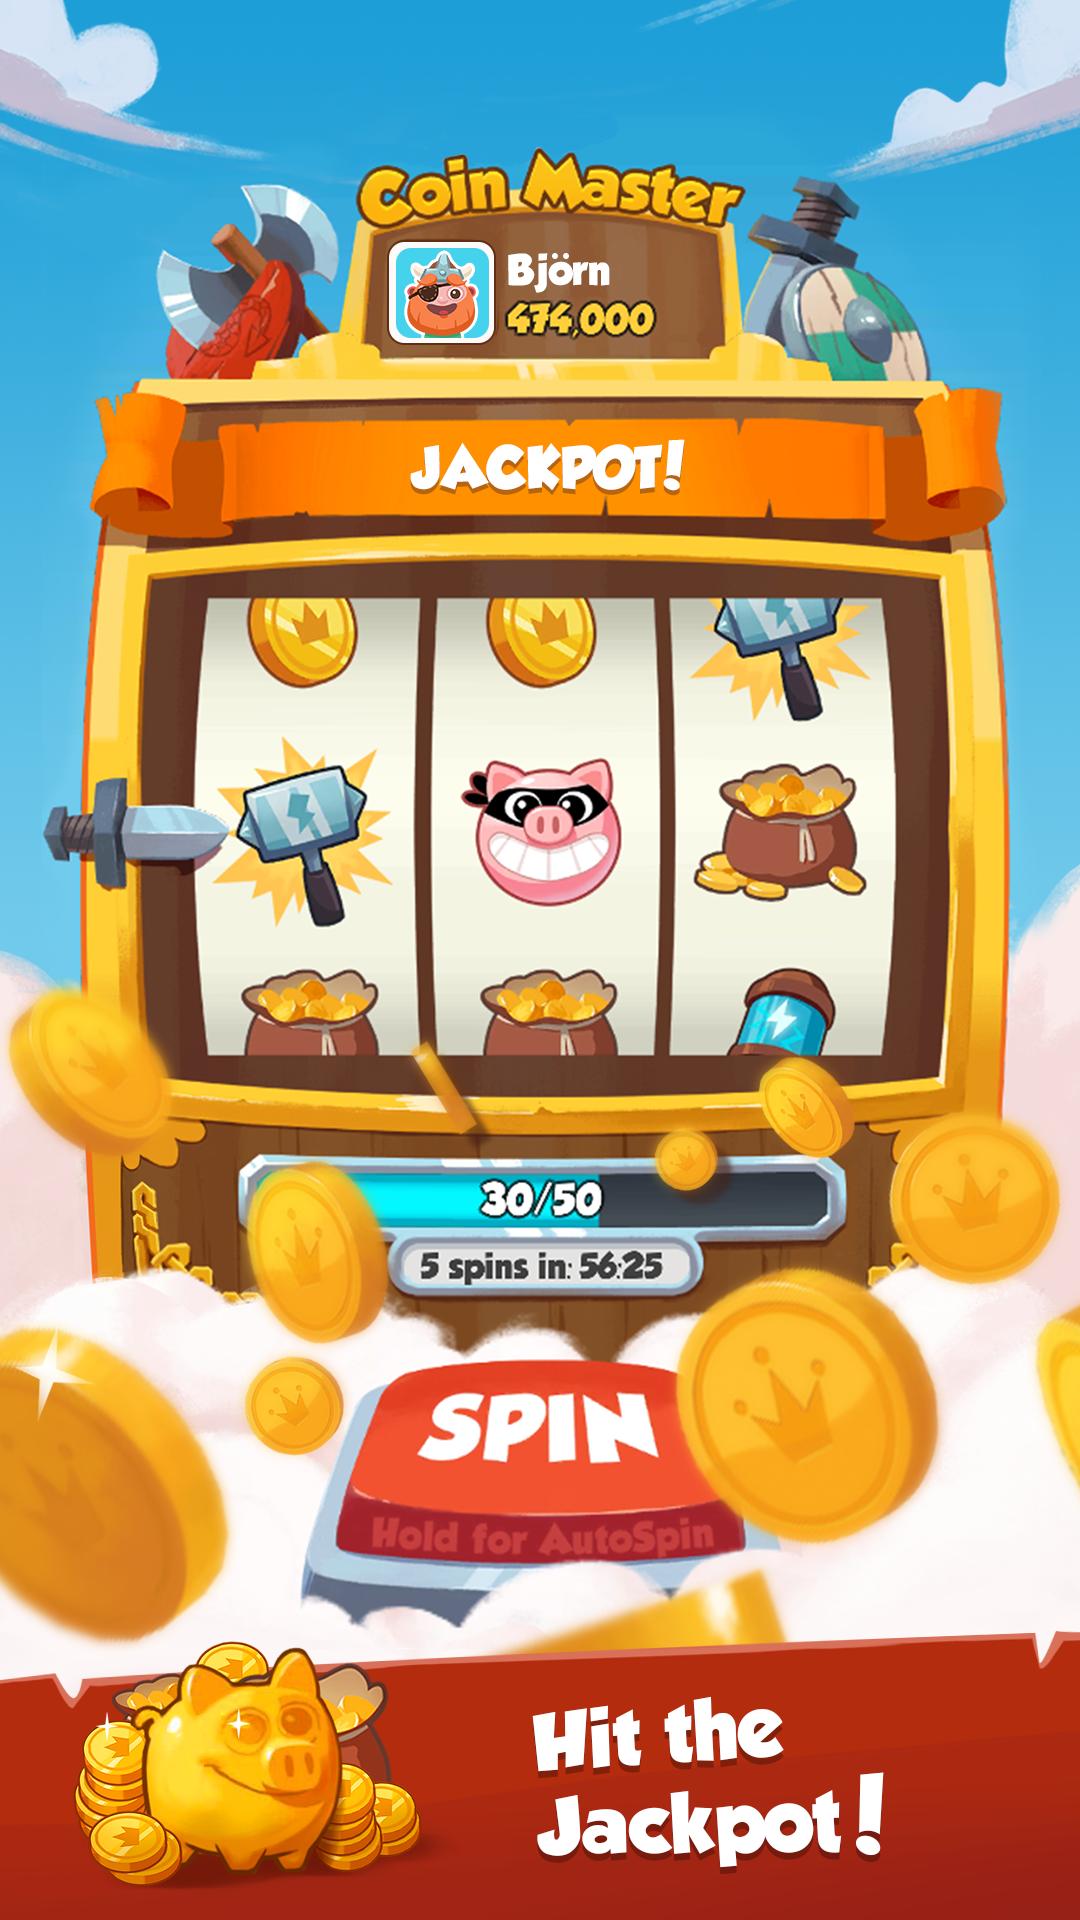 Coin Master for Android - APK Download